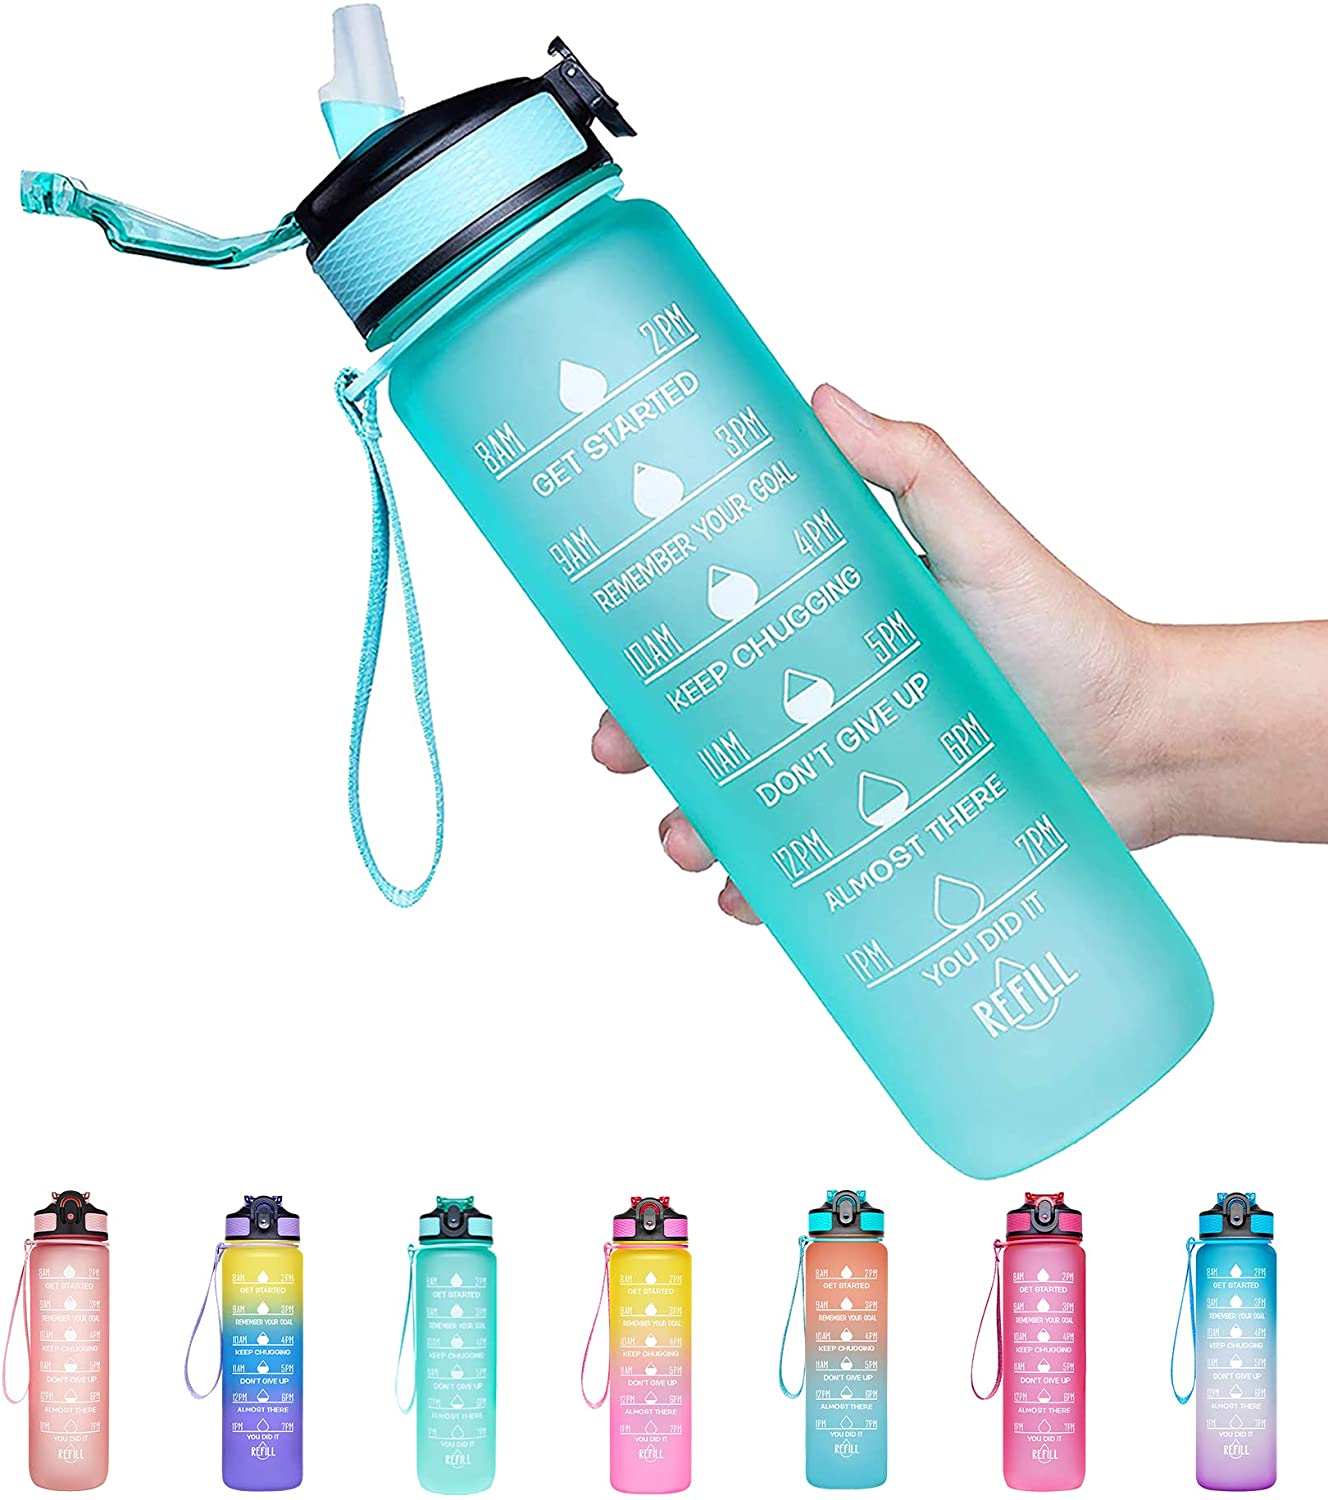 https://video-images.vice.com//products/61e71f4a41fbab009c045548/gallery-image/1642536780110-giotto-water-bottle.jpeg?crop=0.7530120481927711xw:1xh;center,center